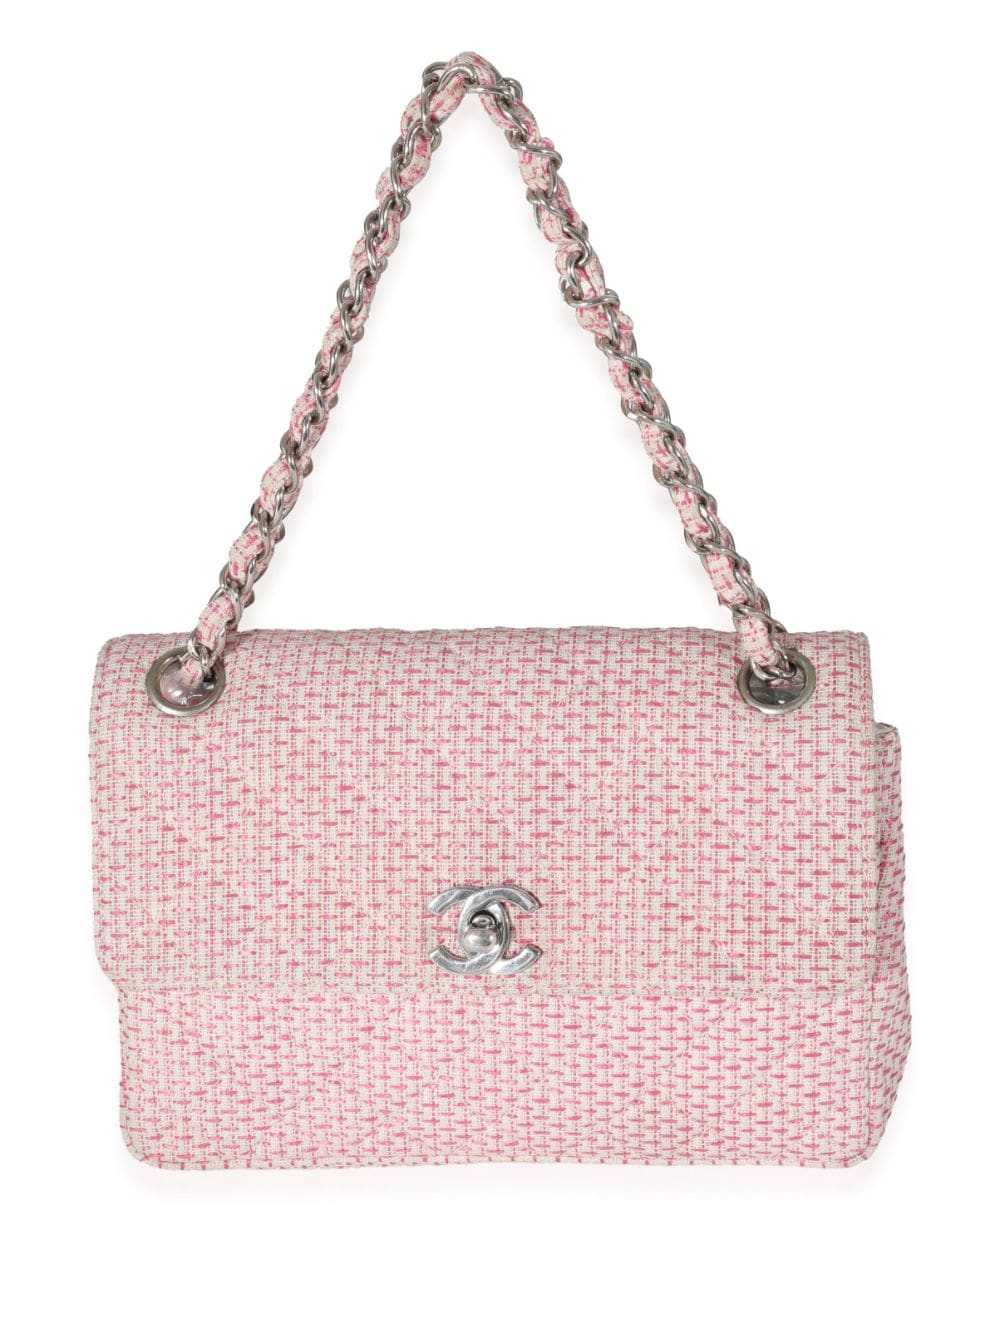 Chanel Pre-owned 1995 Diamond-Quilted CC Heart Handbag - Pink